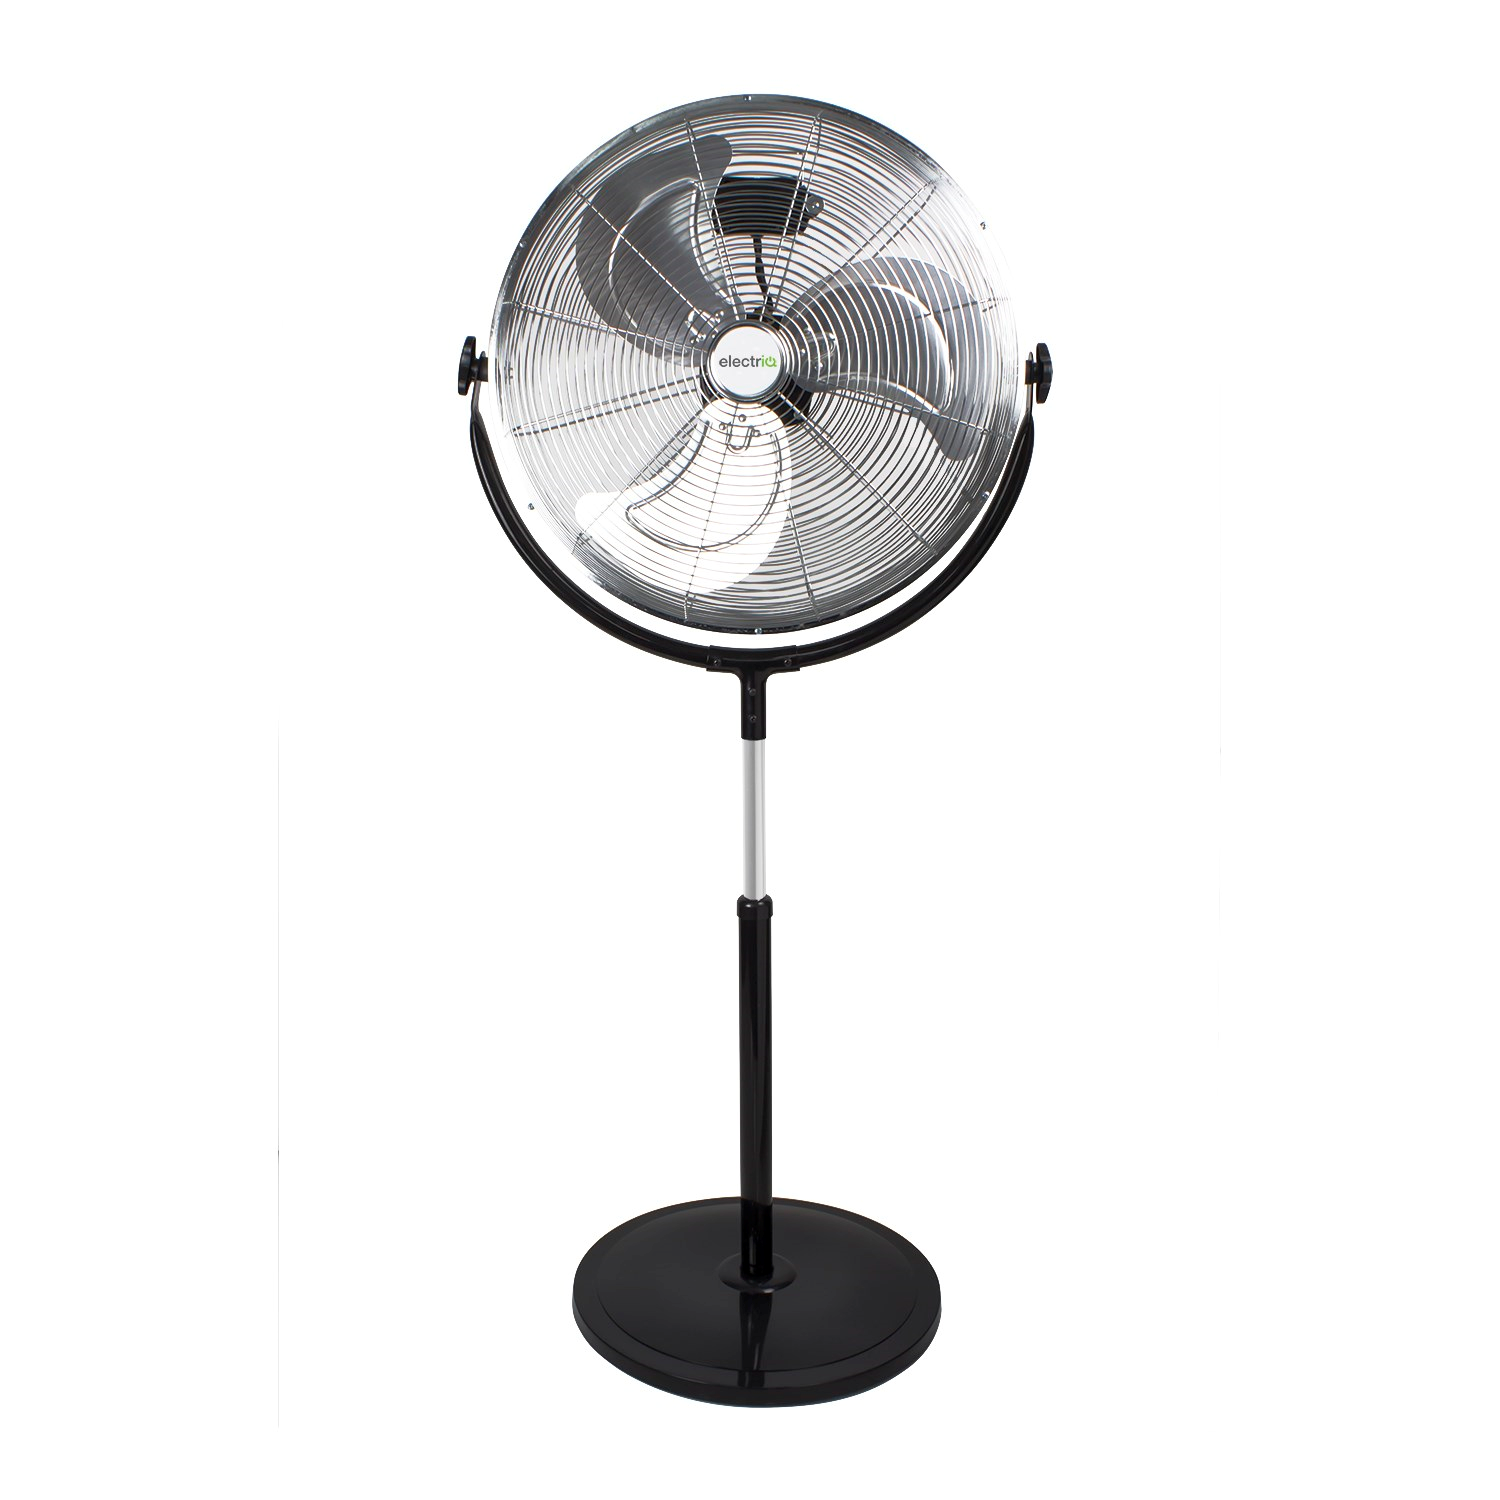 electriQ 16 Inch High velocity Pedestal Fan with adjustable Stand - Black and Chrome